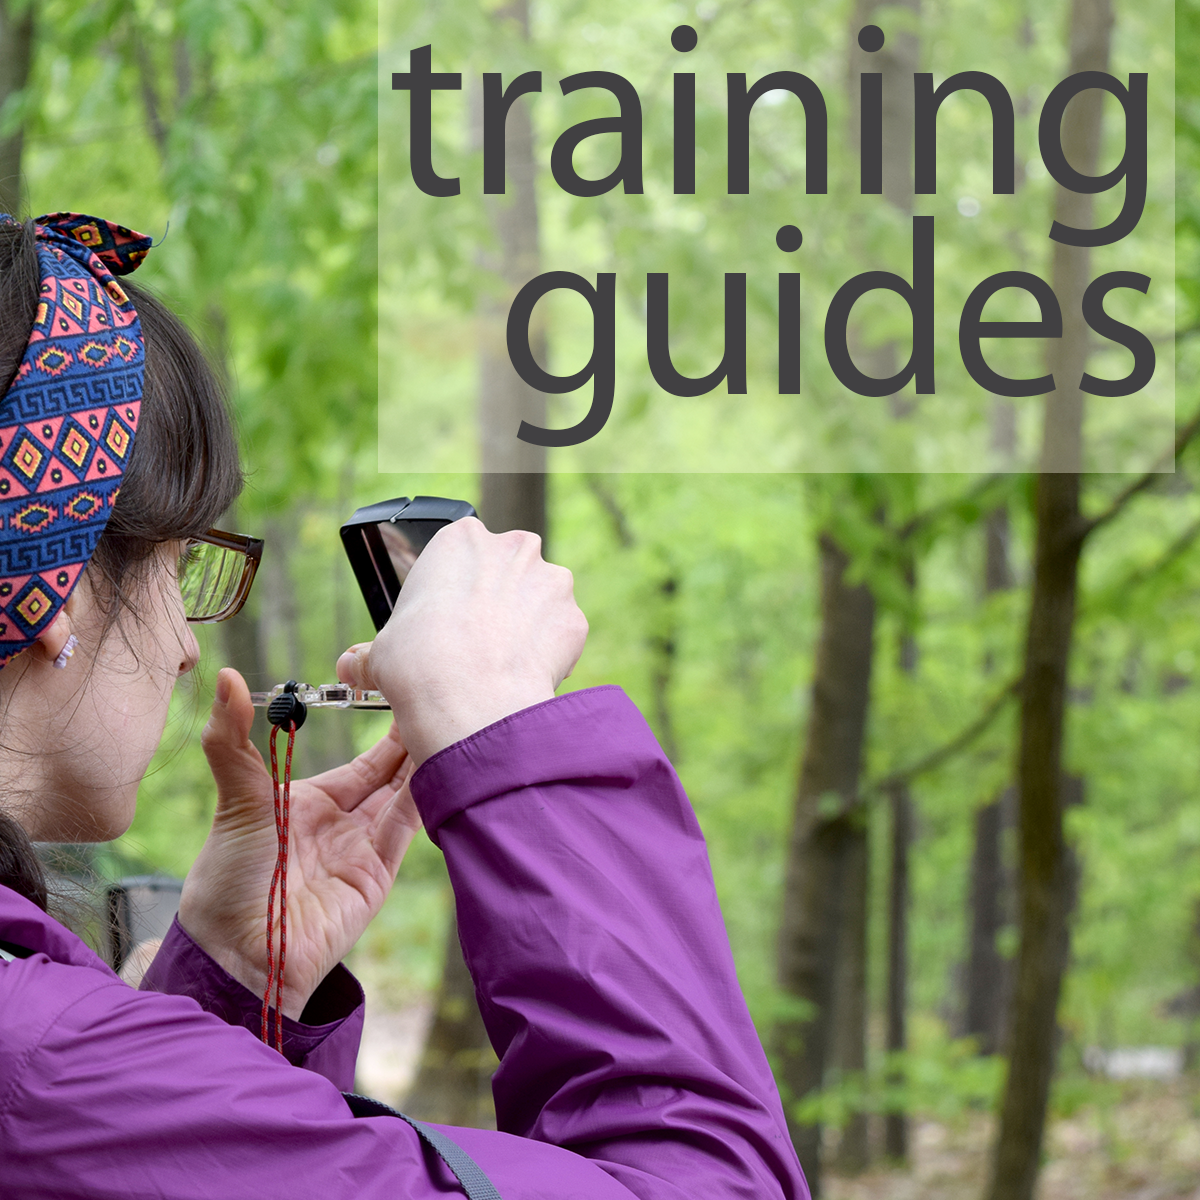 training guides icon with hands